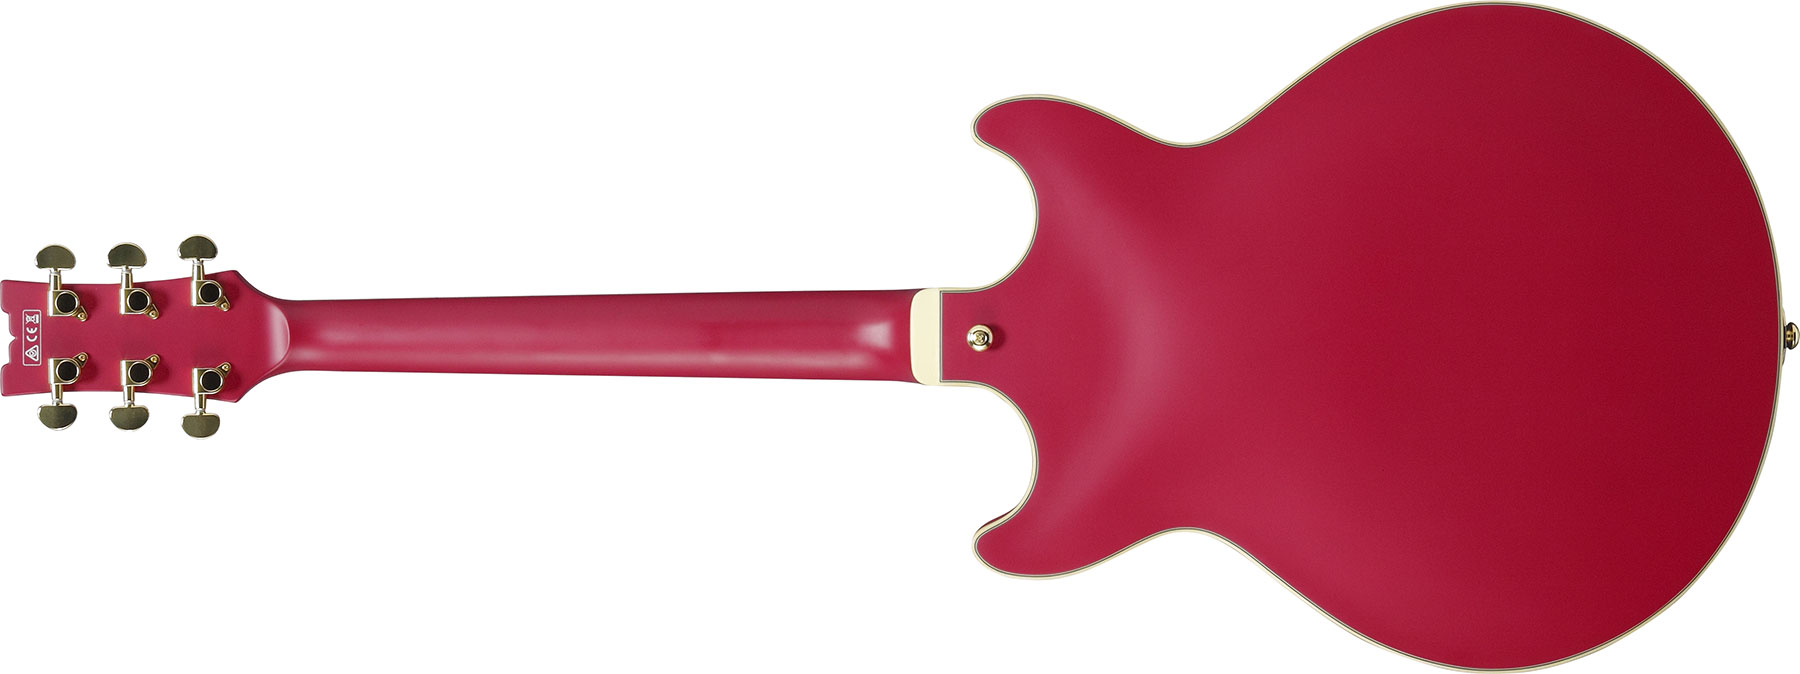 Ibanez Amh90 Crf Artcore Expressionist 2h Ht Eb - Cherry Red Flat - Hollow-body electric guitar - Variation 1